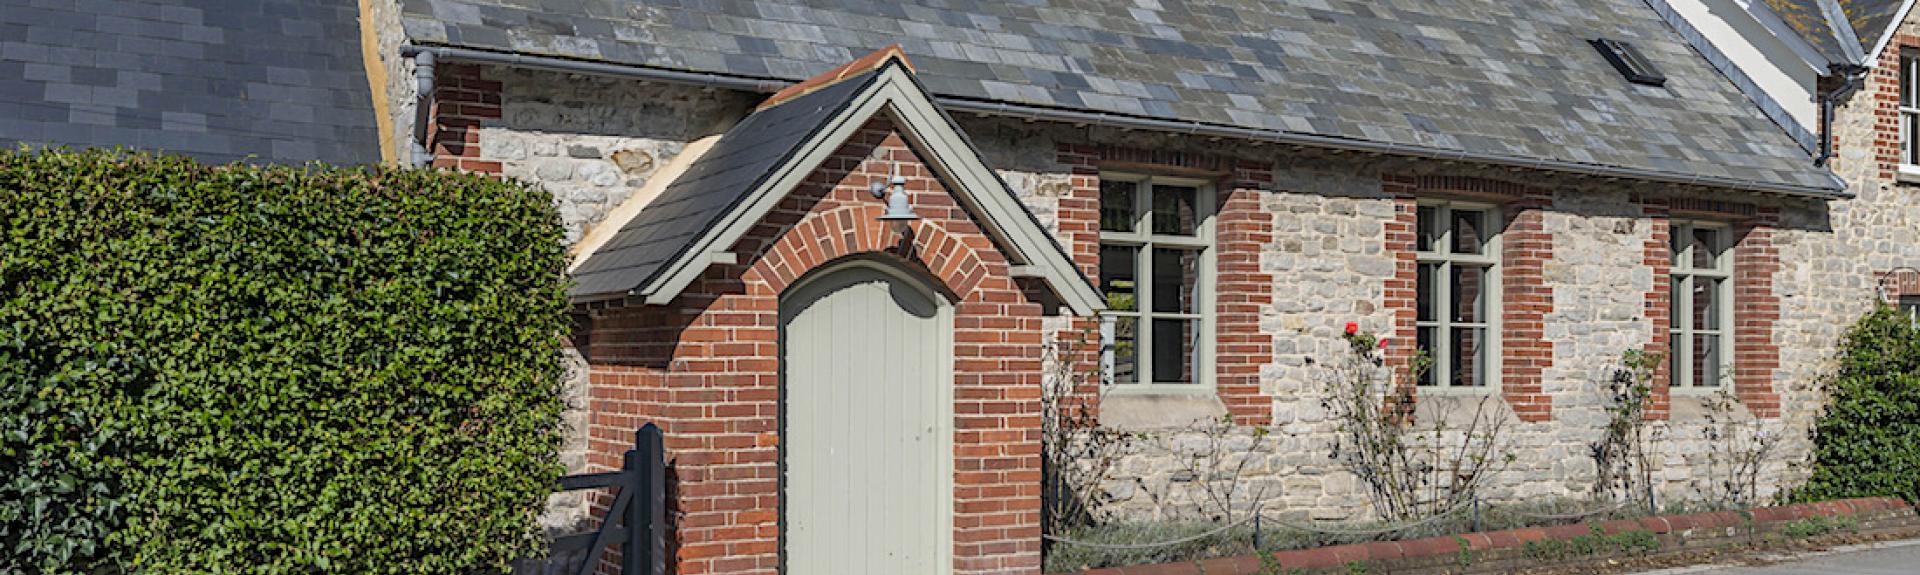 S single-storey chapel conversion to a holiday cottage in West Lulworth